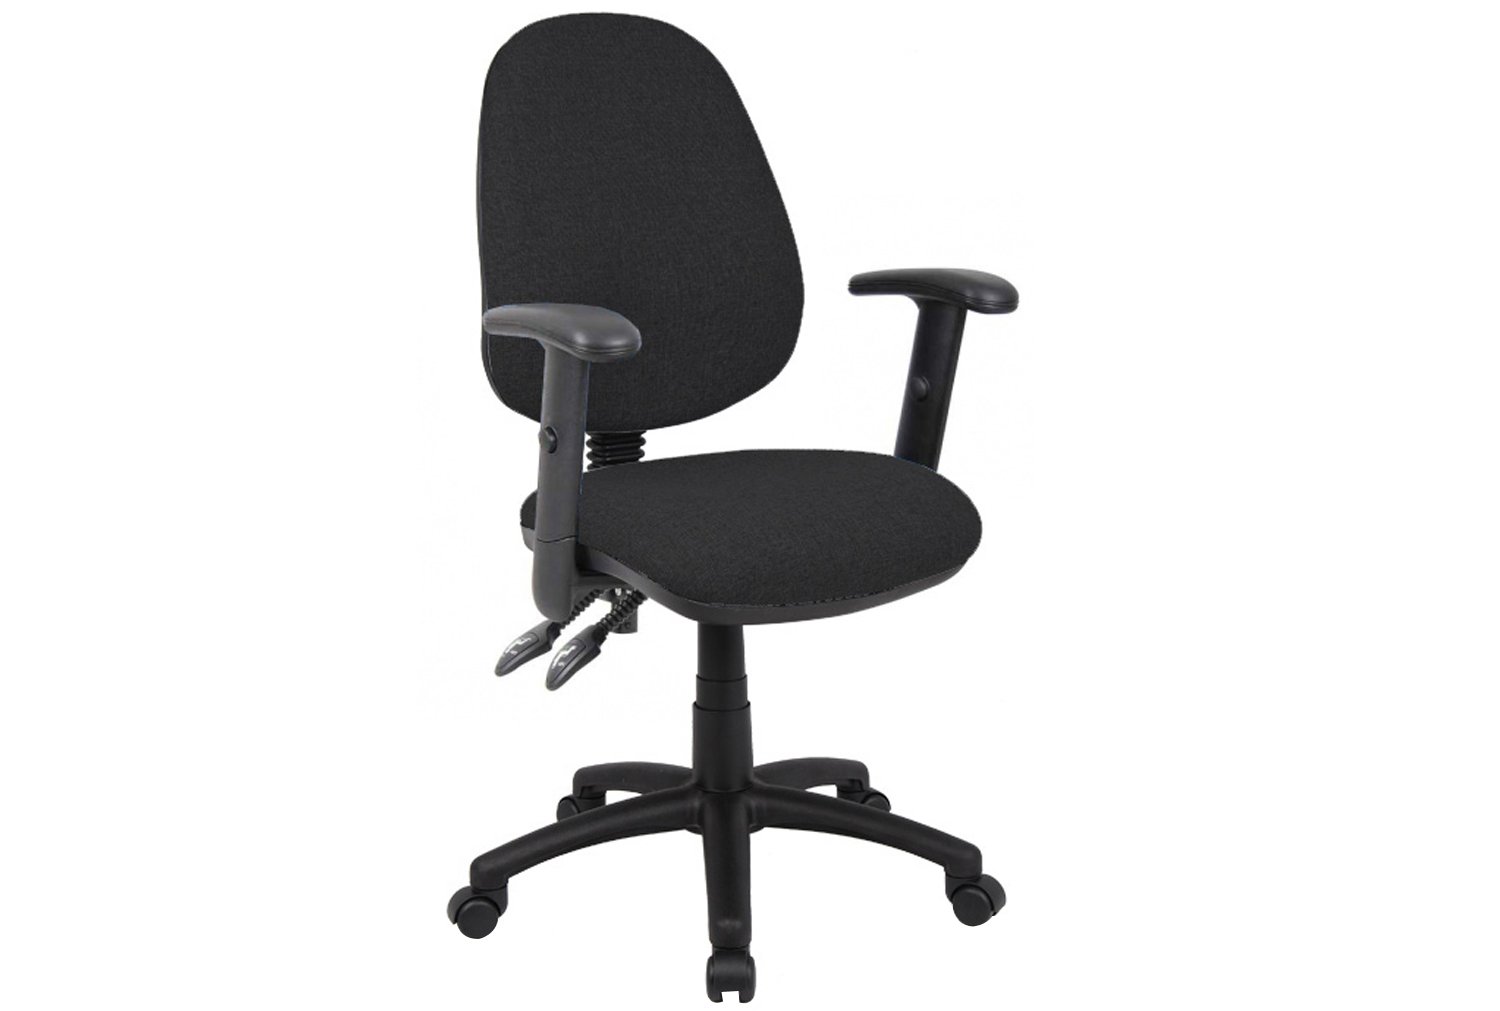 Full Lumbar 2 Lever Operator Office Chair With Adjustable Arms, Black, Express Delivery